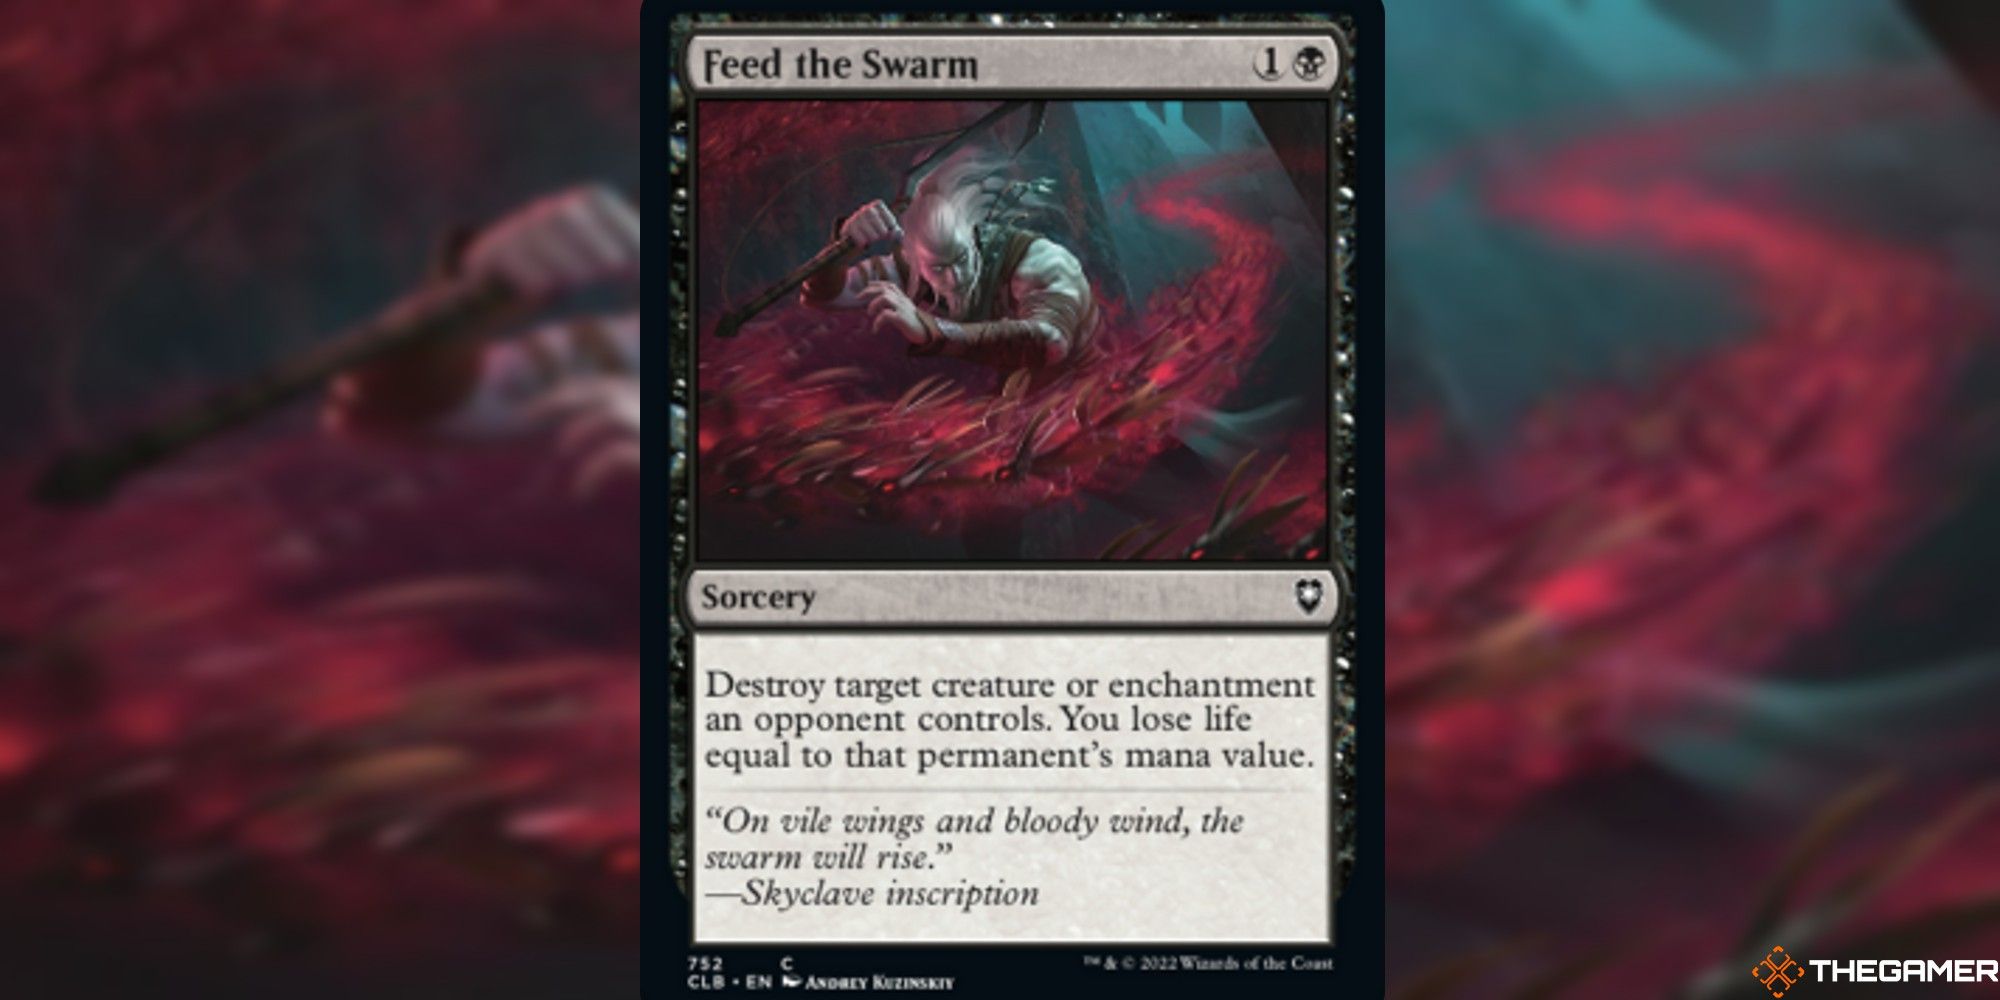 Image of the Feed the Swarm card in Magic: The Gathering, with art by Andrey Kuzinskiy